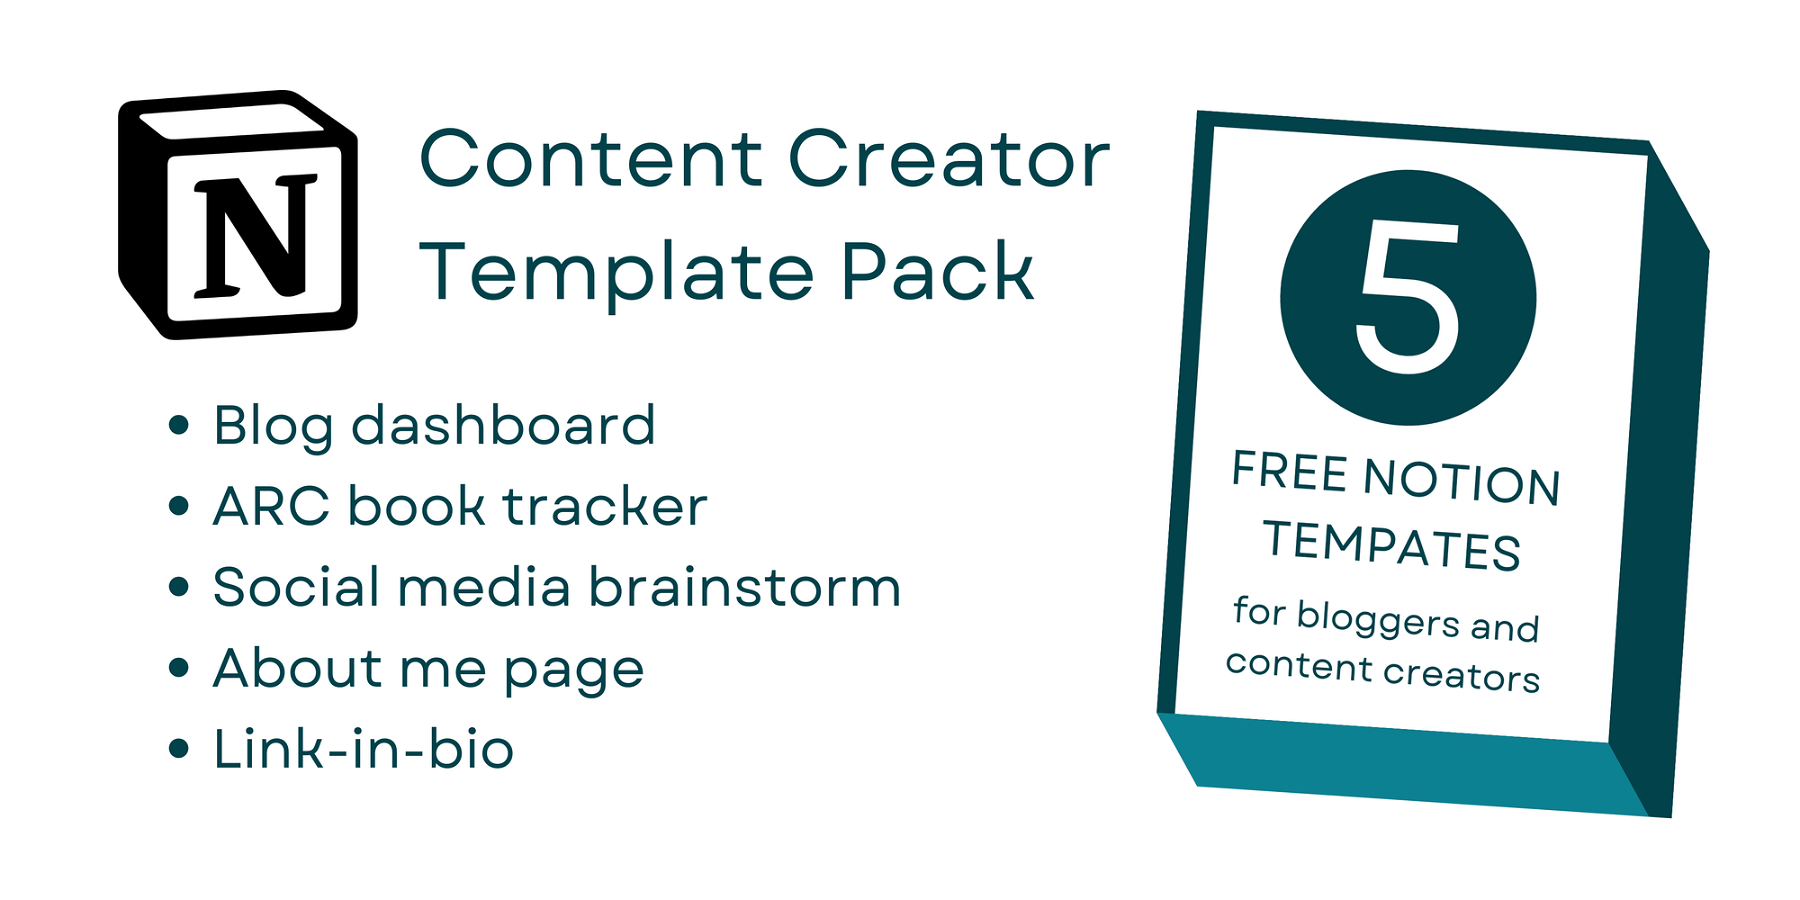 Content Creator Notion Template Pack | 5 Free Templates